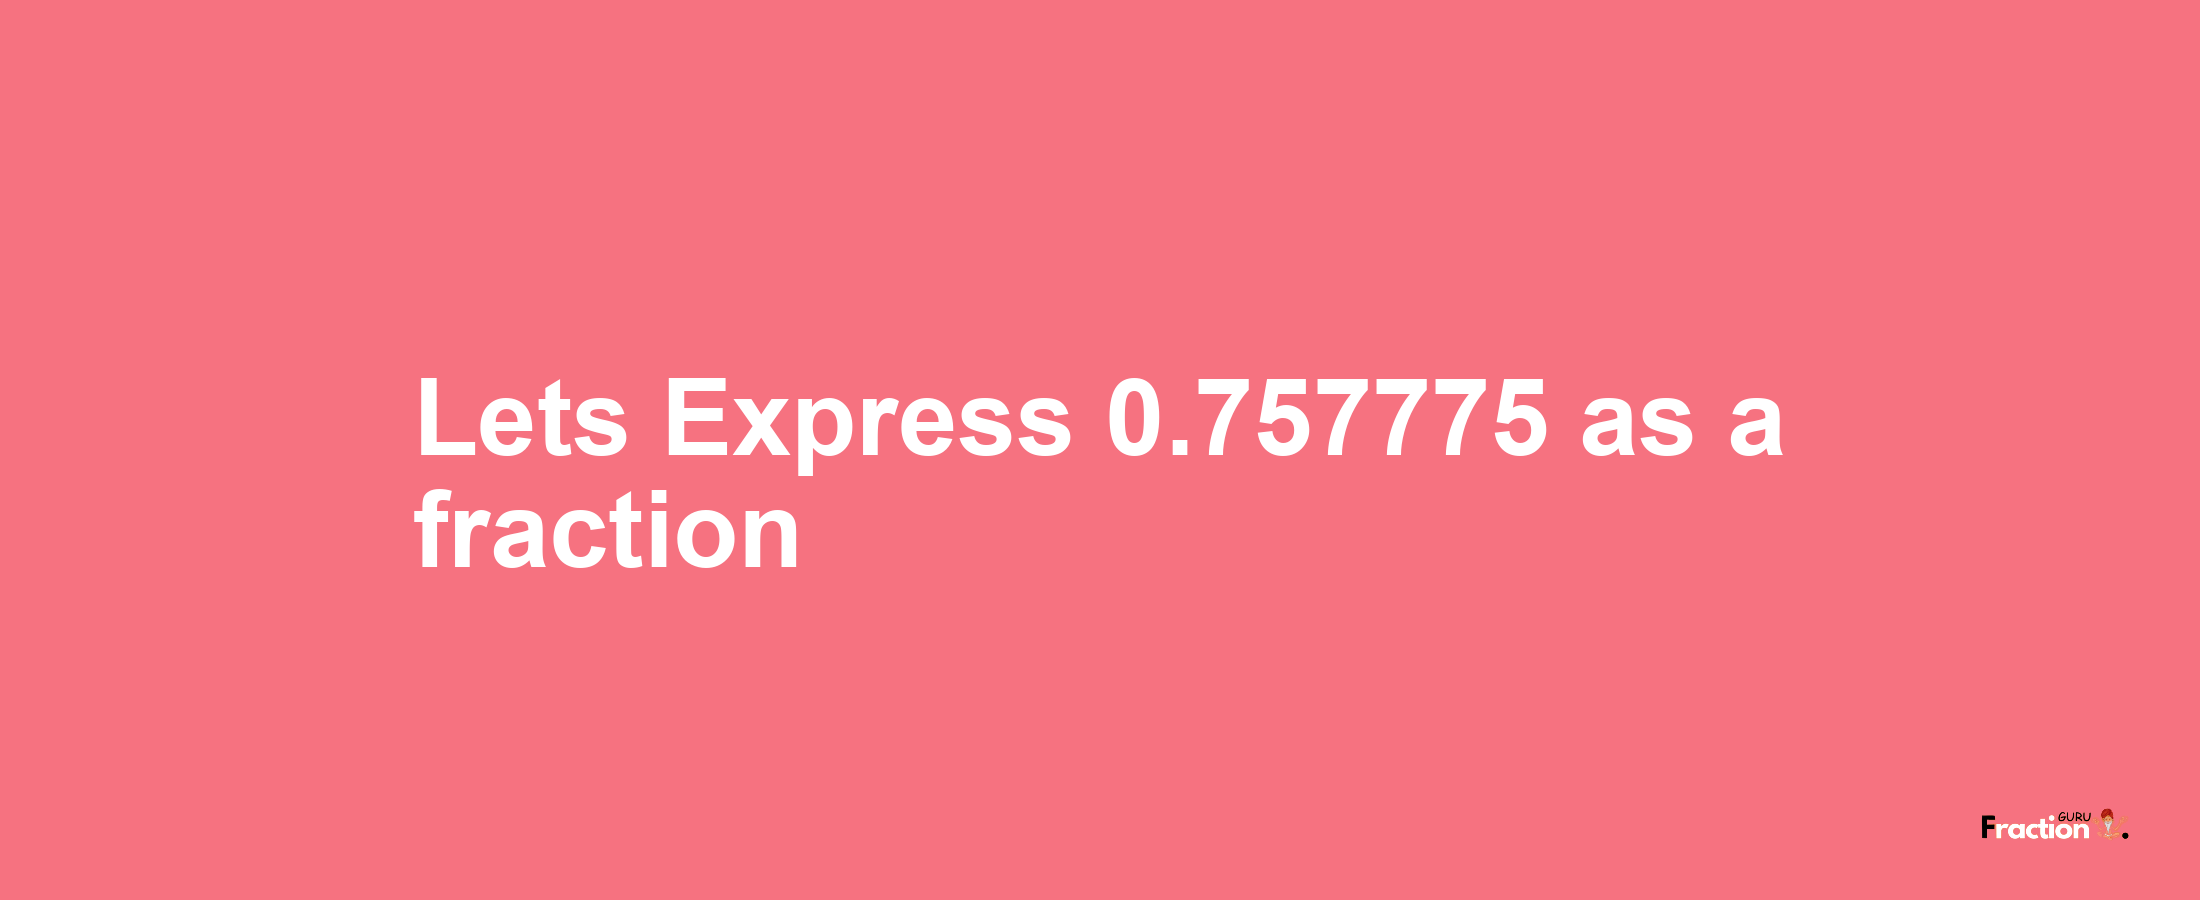 Lets Express 0.757775 as afraction